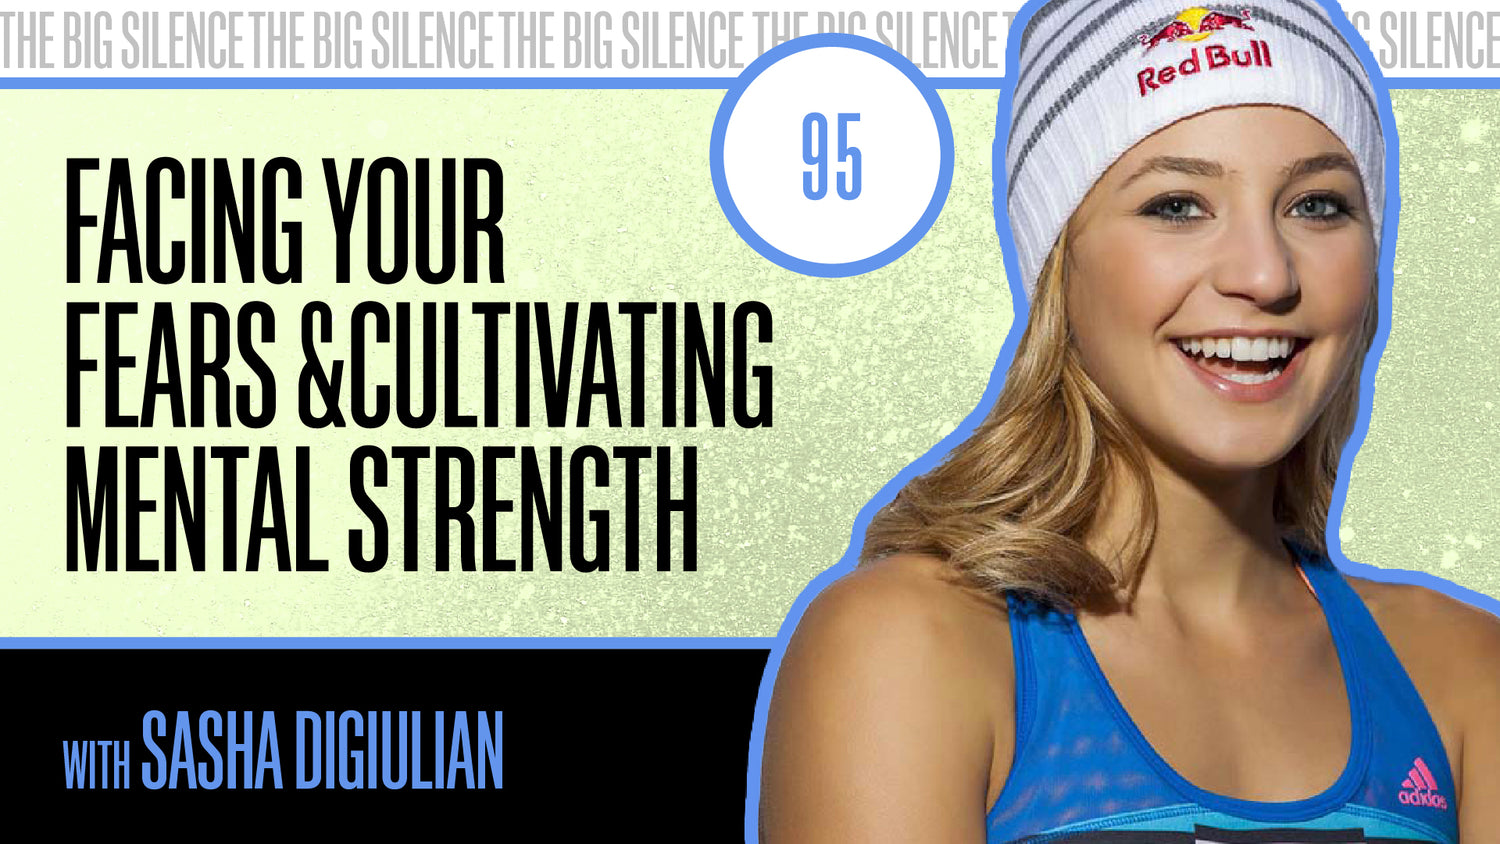 95. SASHA DIGIULIAN ON CLIMBING TO NEW HEIGHTS, FACING FEARS & CULTIVATING MENTAL STRENGTH